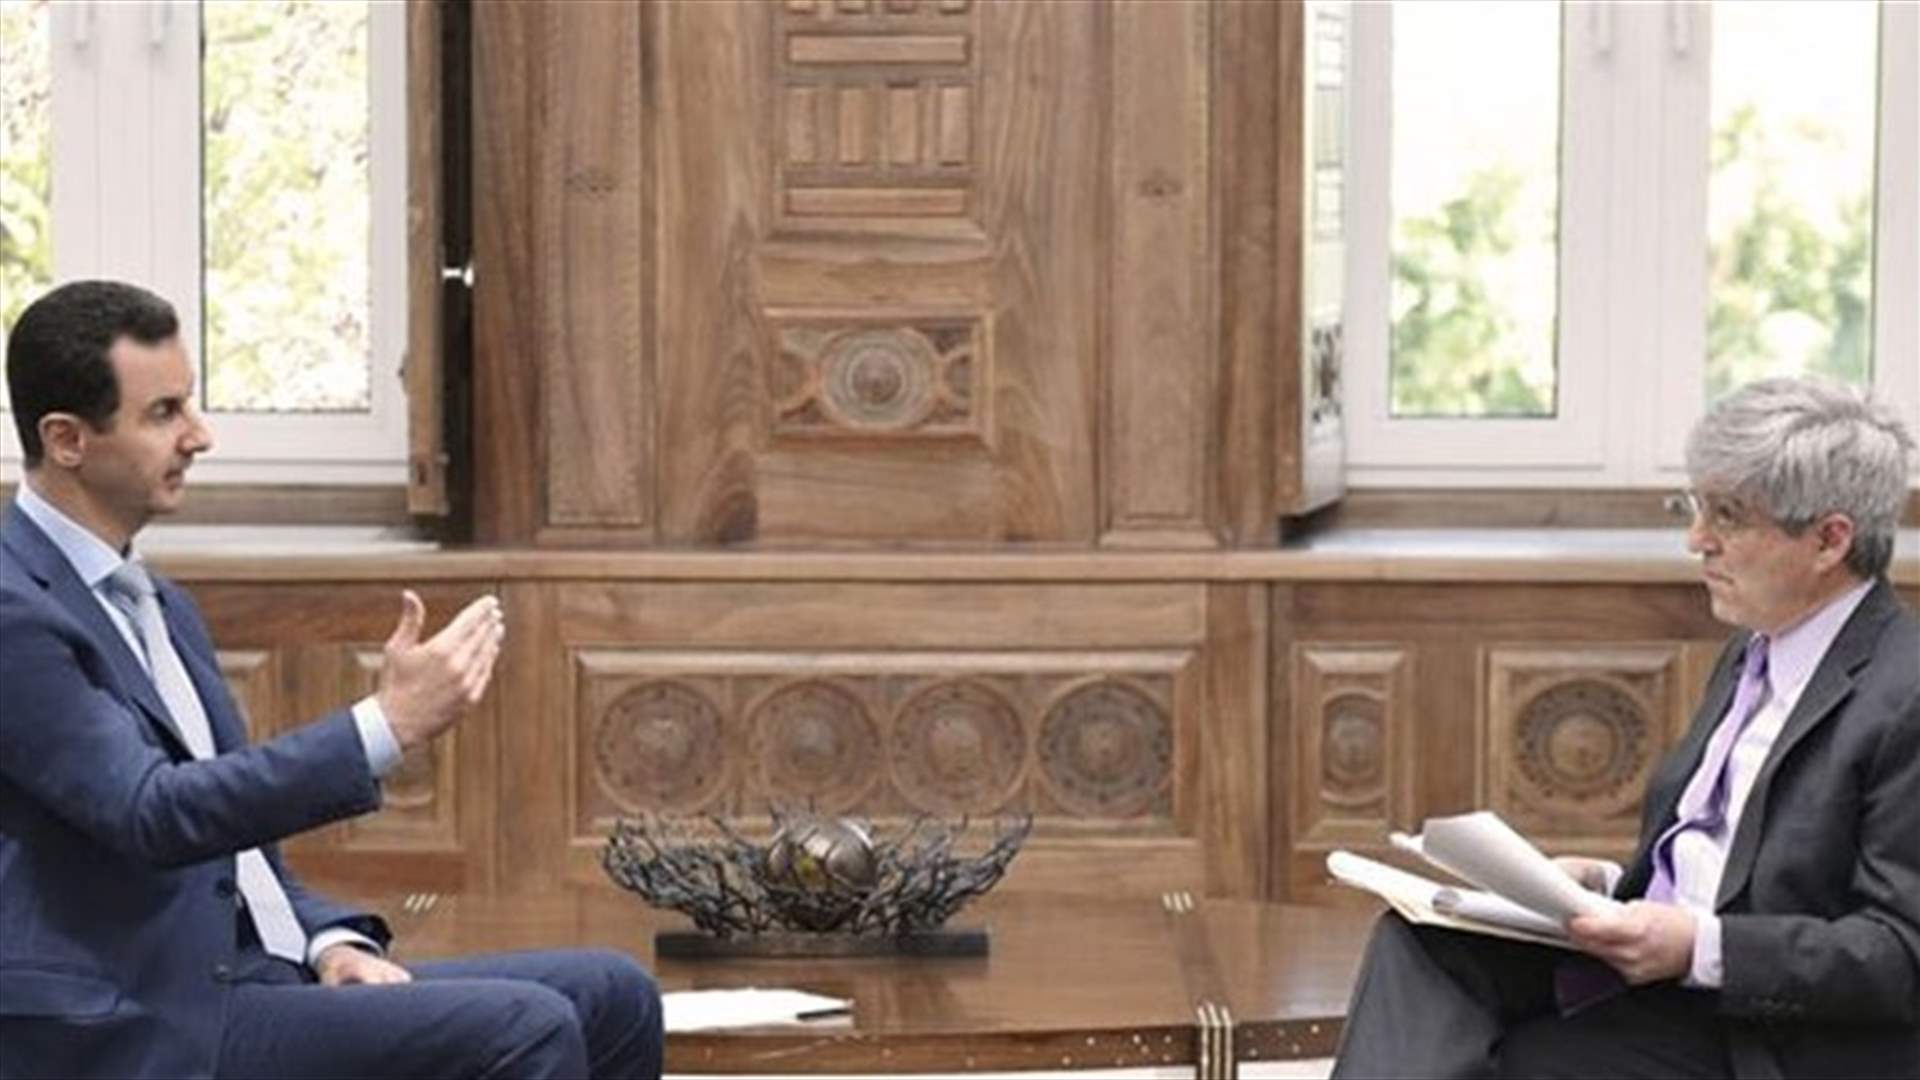 Assad rejects safe zones in Syria - Yahoo News interview